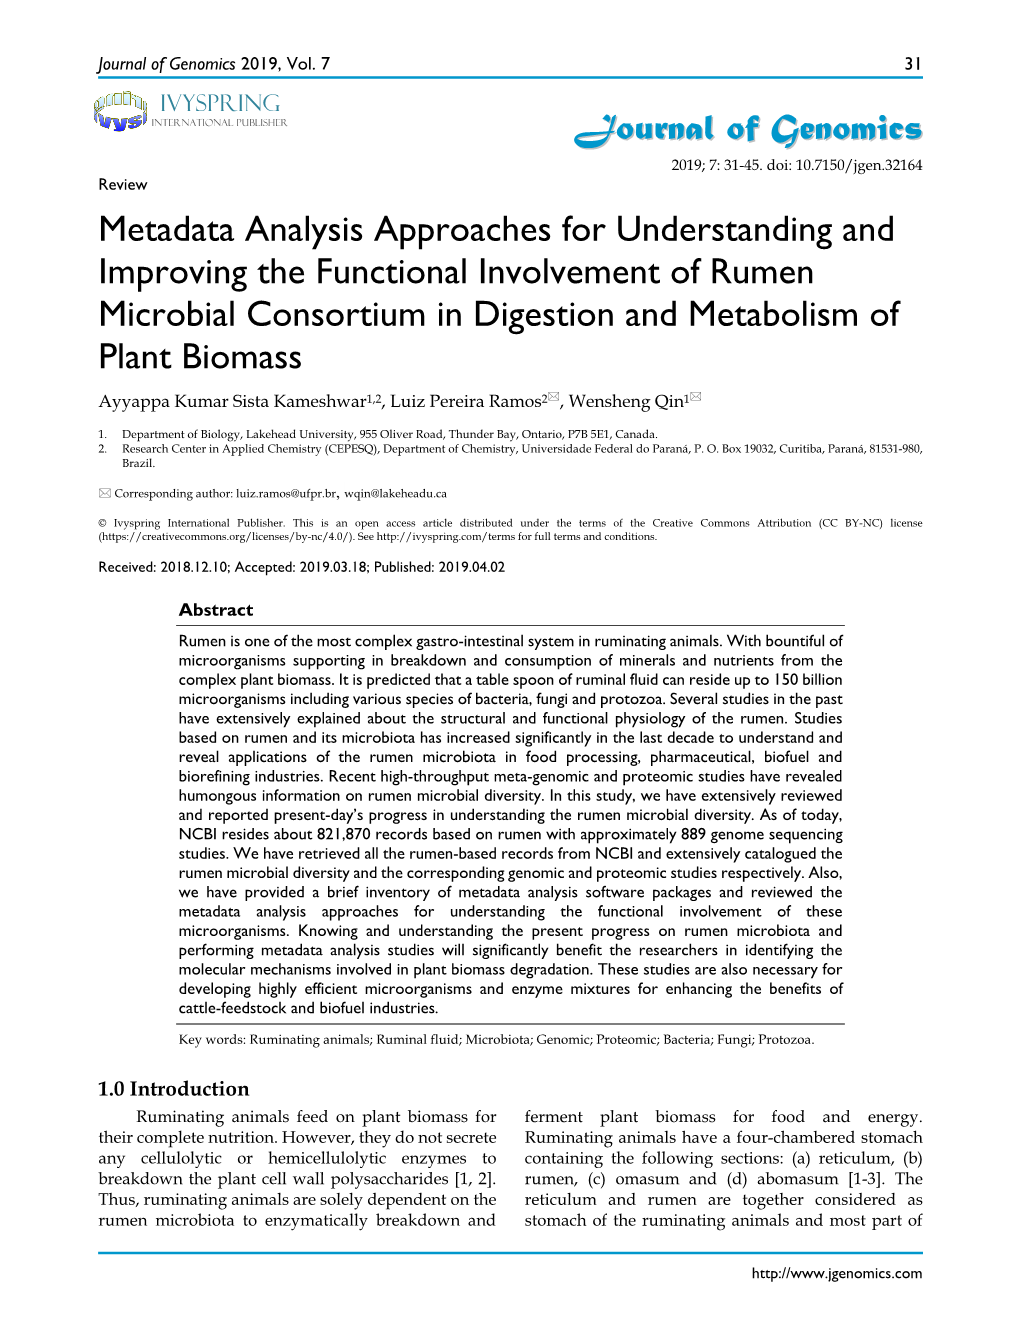 Journal of Genomics Metadata Analysis Approaches for Understanding and Improving the Functional Involvement of Rumen Microbial C